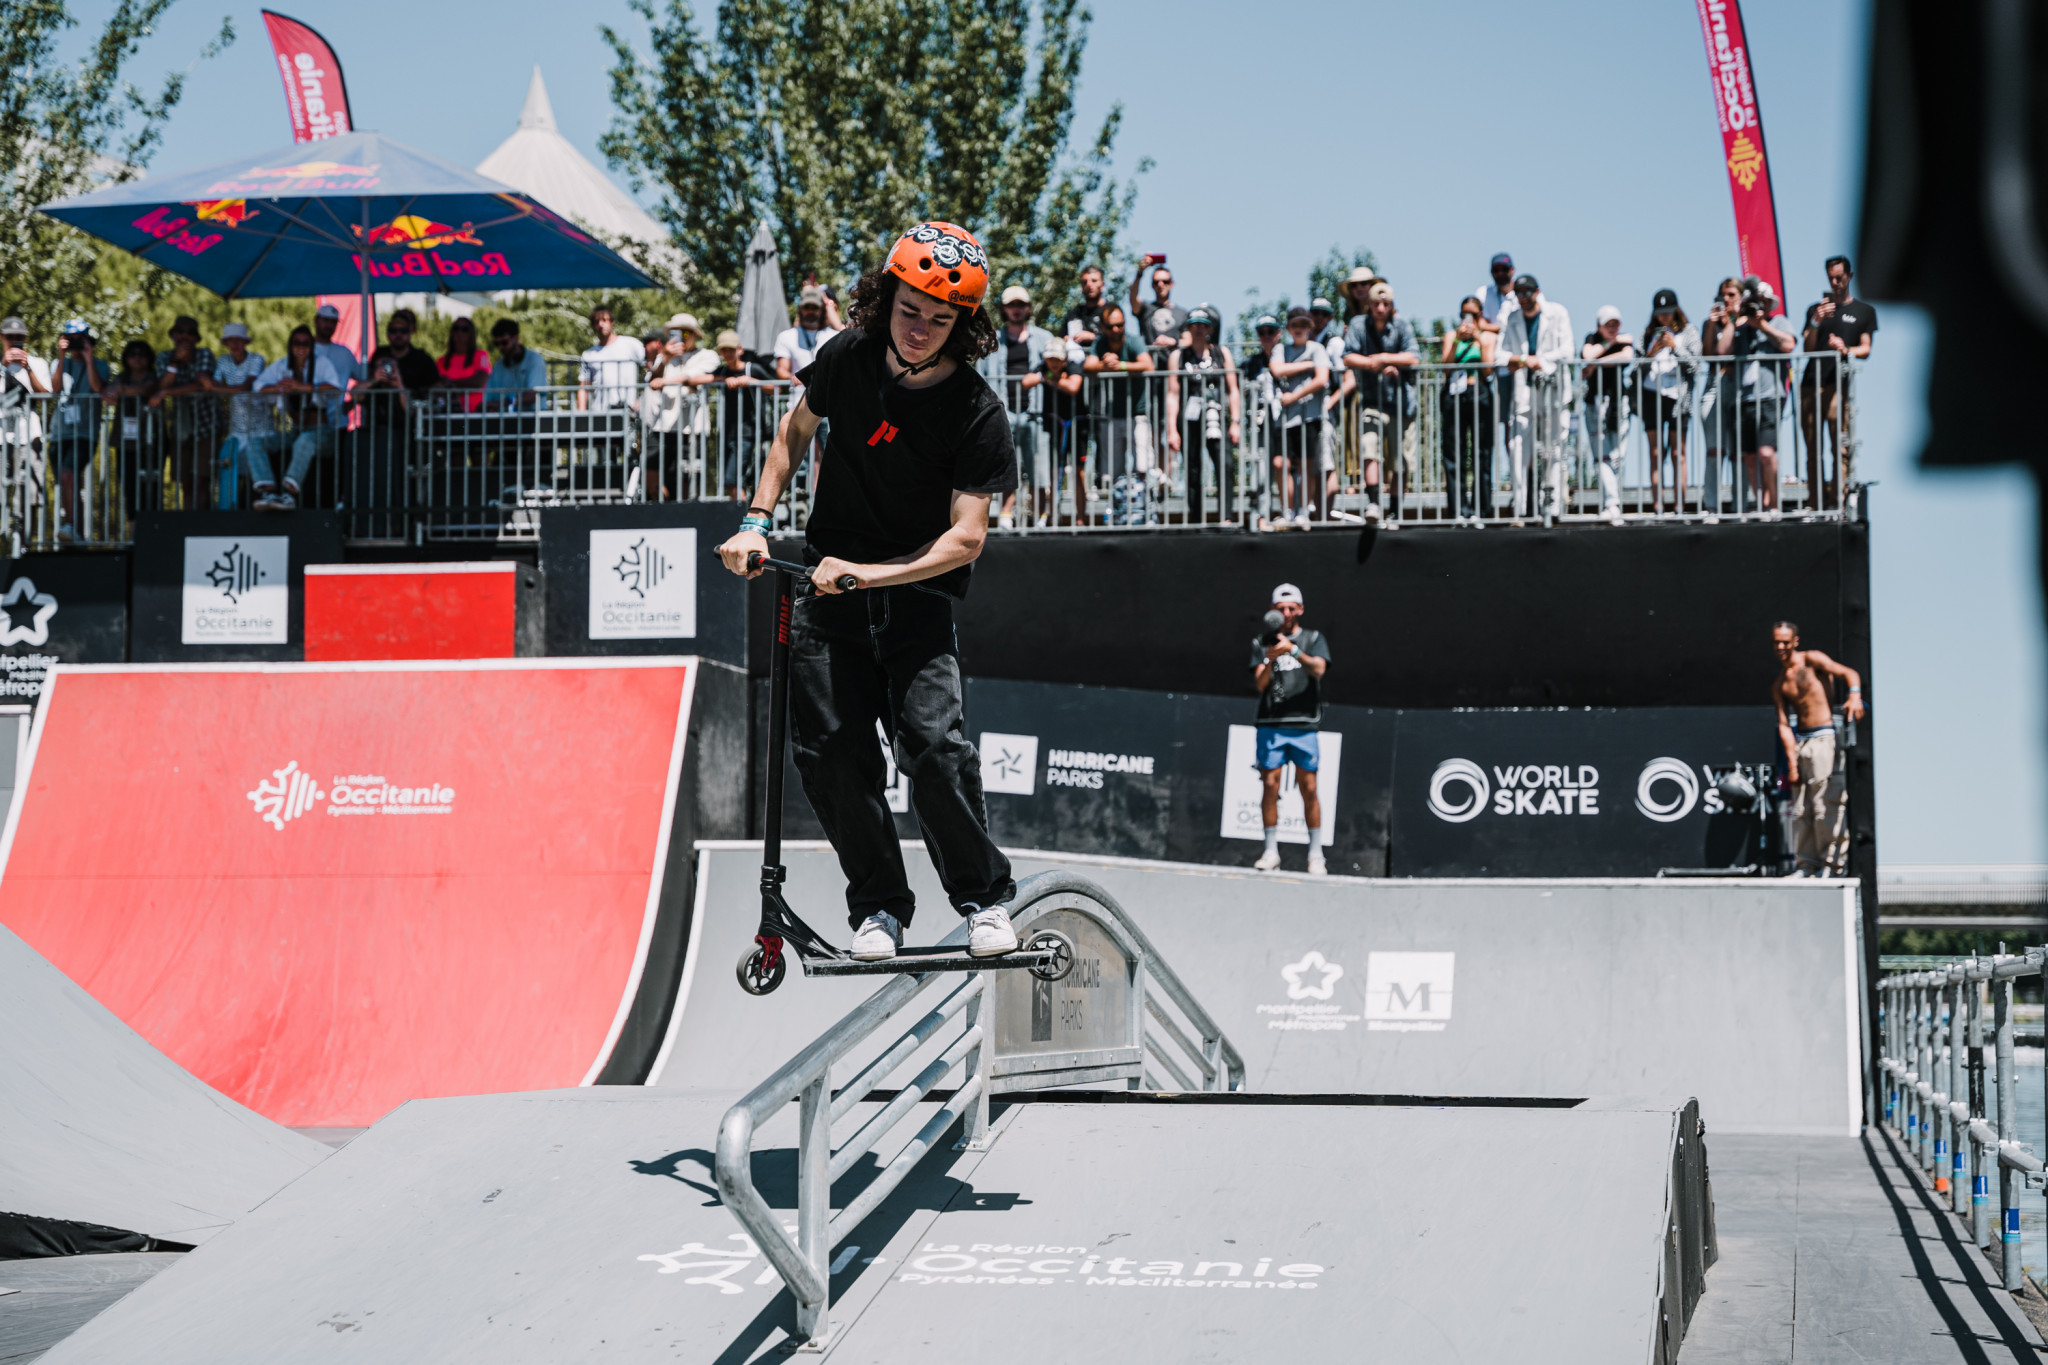 France's Arthur Frugier had a tough time on his first run with two big falls but the 15-year-old was willed on by the crowd in the second to score an impressive 78.75 points to secure 11th place ©Hurricane - FISE